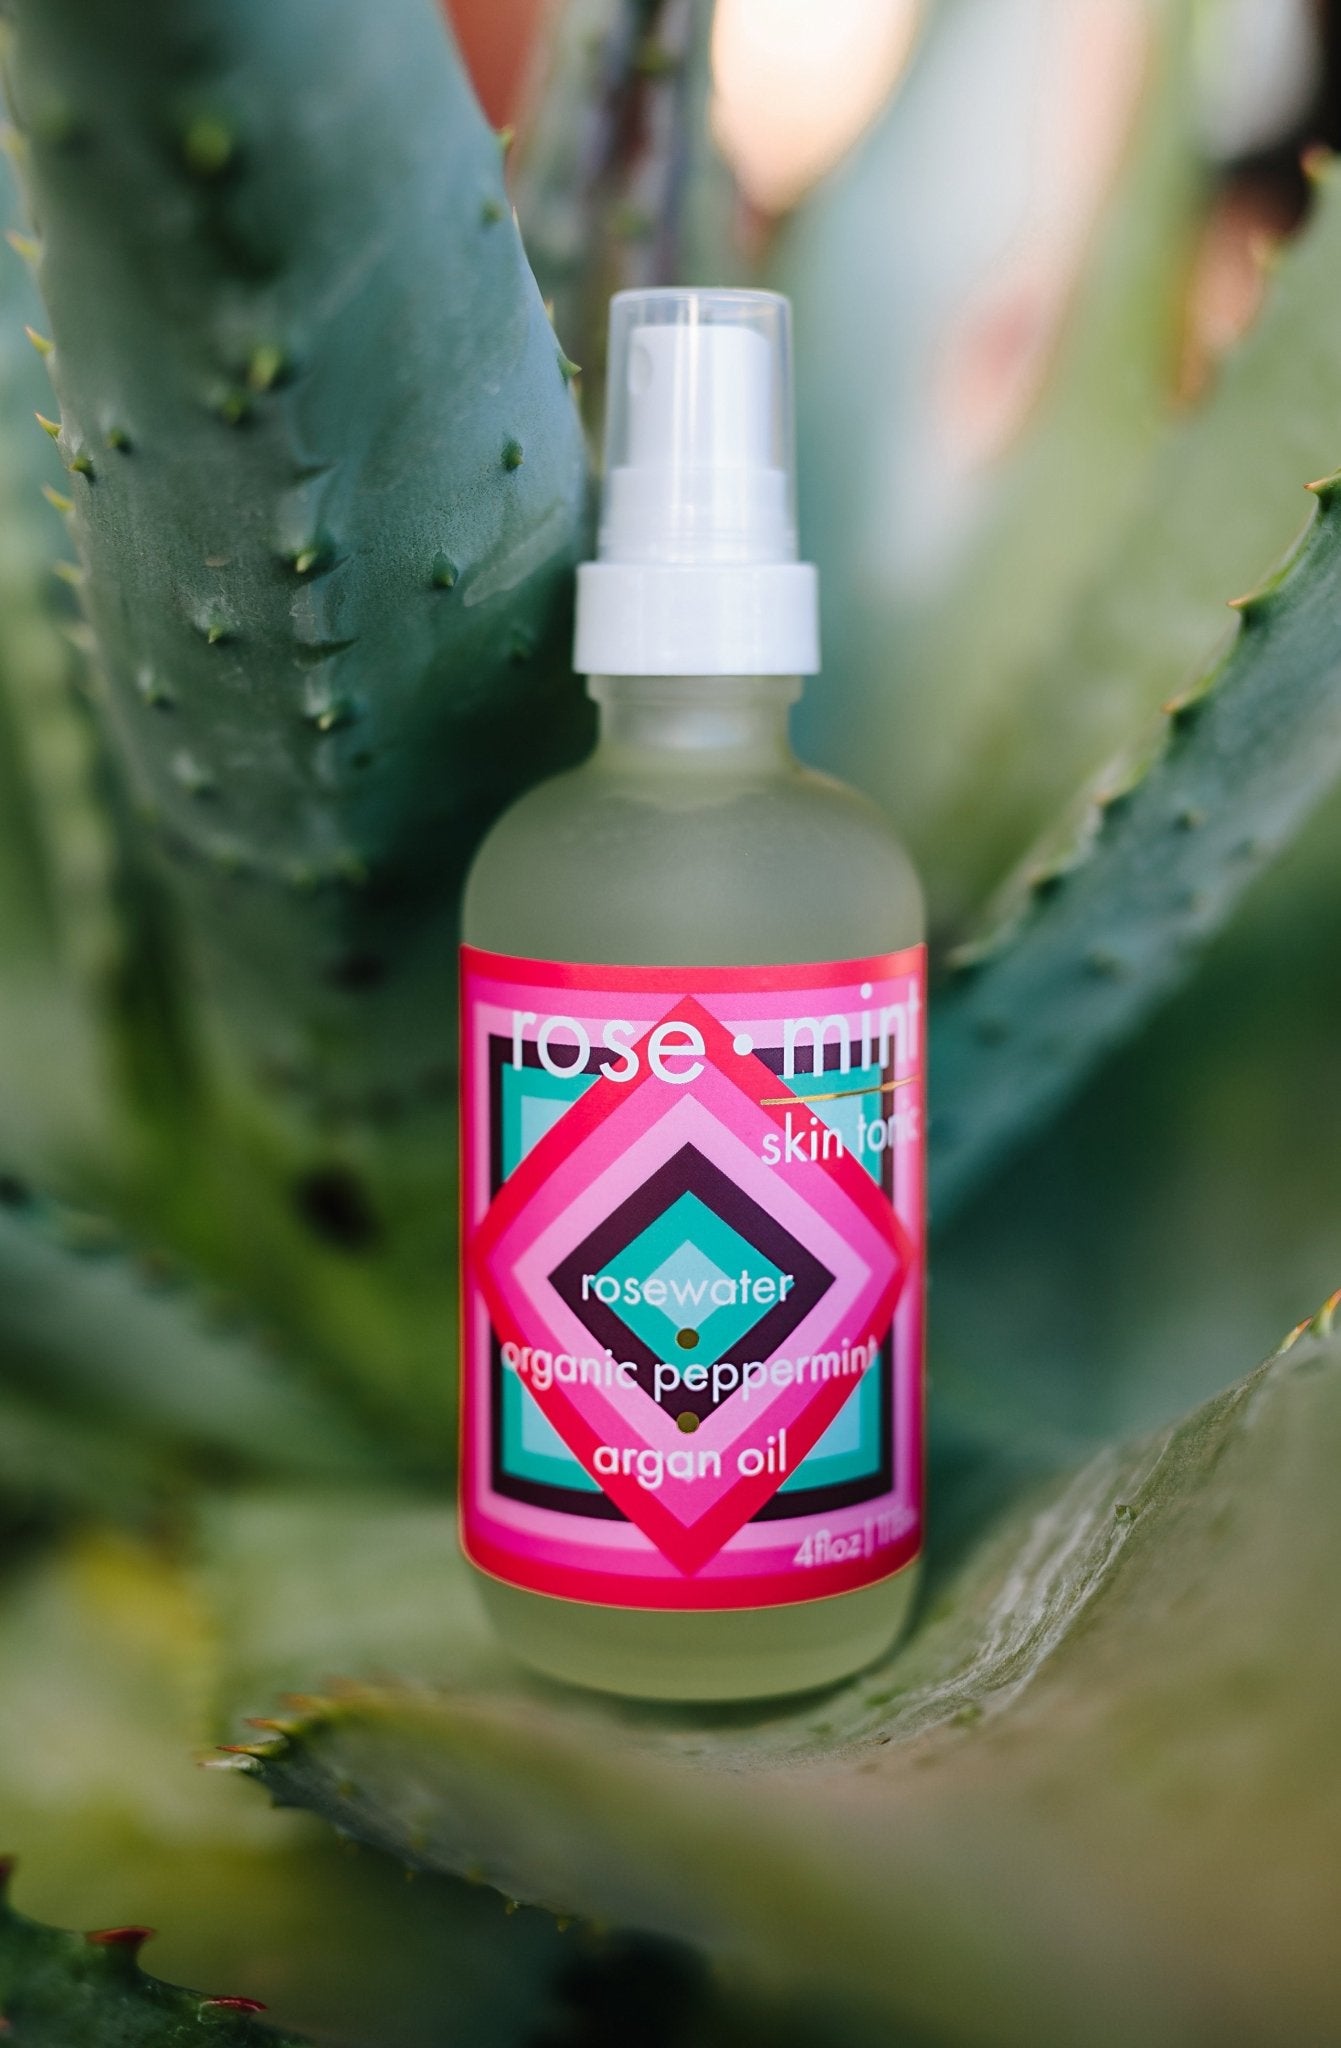 ROSE MINT skin tonic by LUA skincare Leaves of Leisure